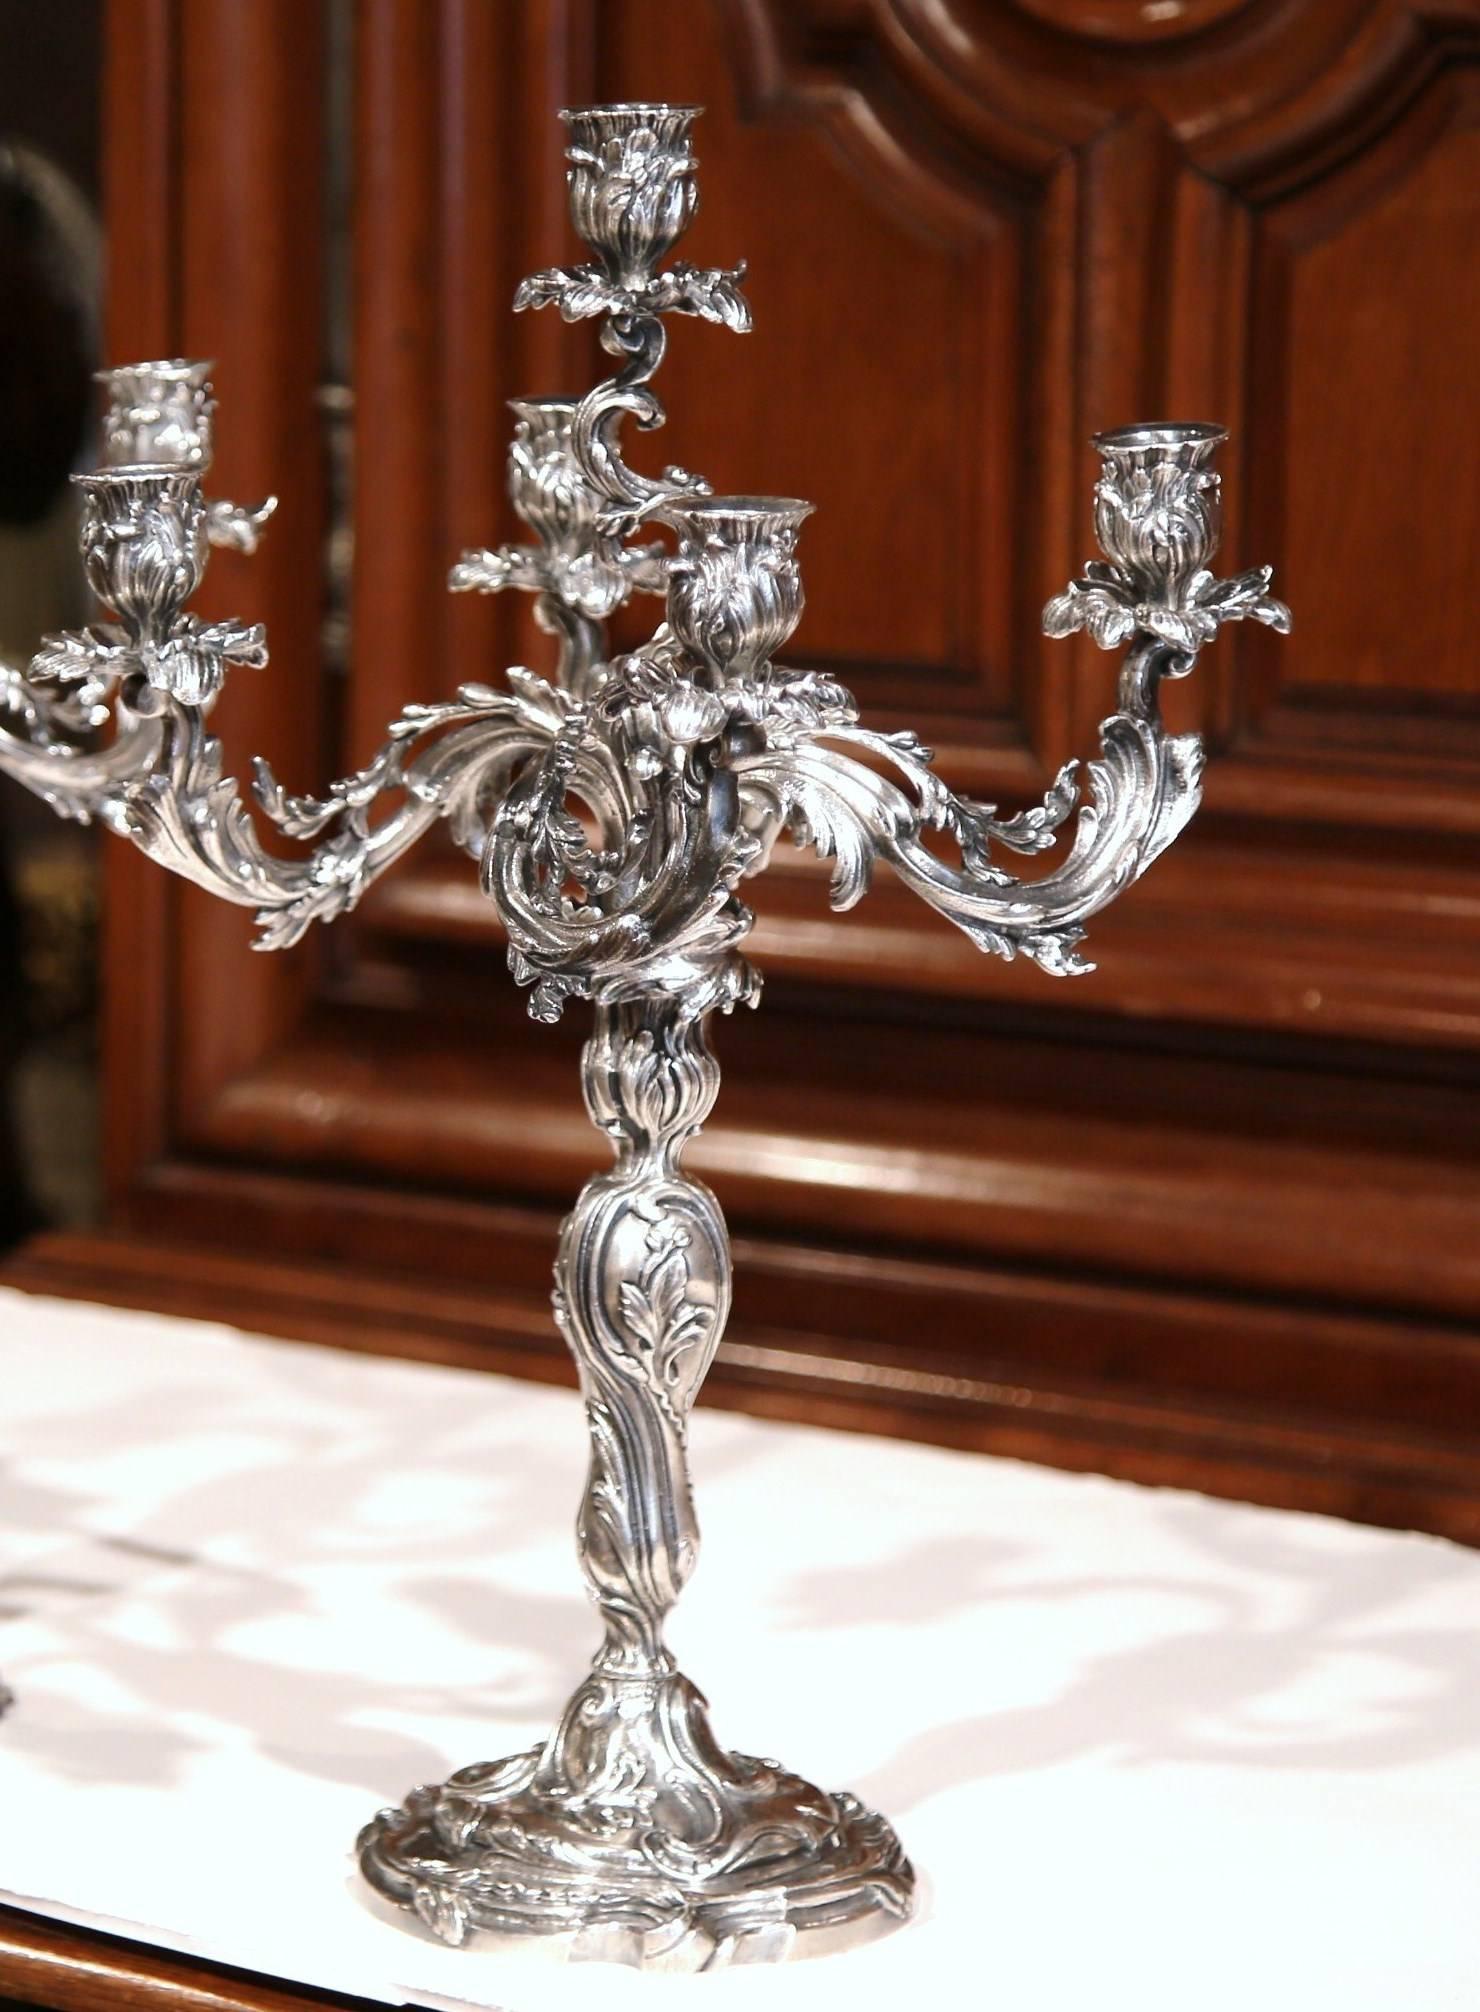 Decorate a table or console with this elegant antique bronze candleholders from Paris, France. Crafted, circa 1860, the silvered candelabra features five beautiful, scrolled arms with leaves and sits on a round ornate base. The delicate candlestick